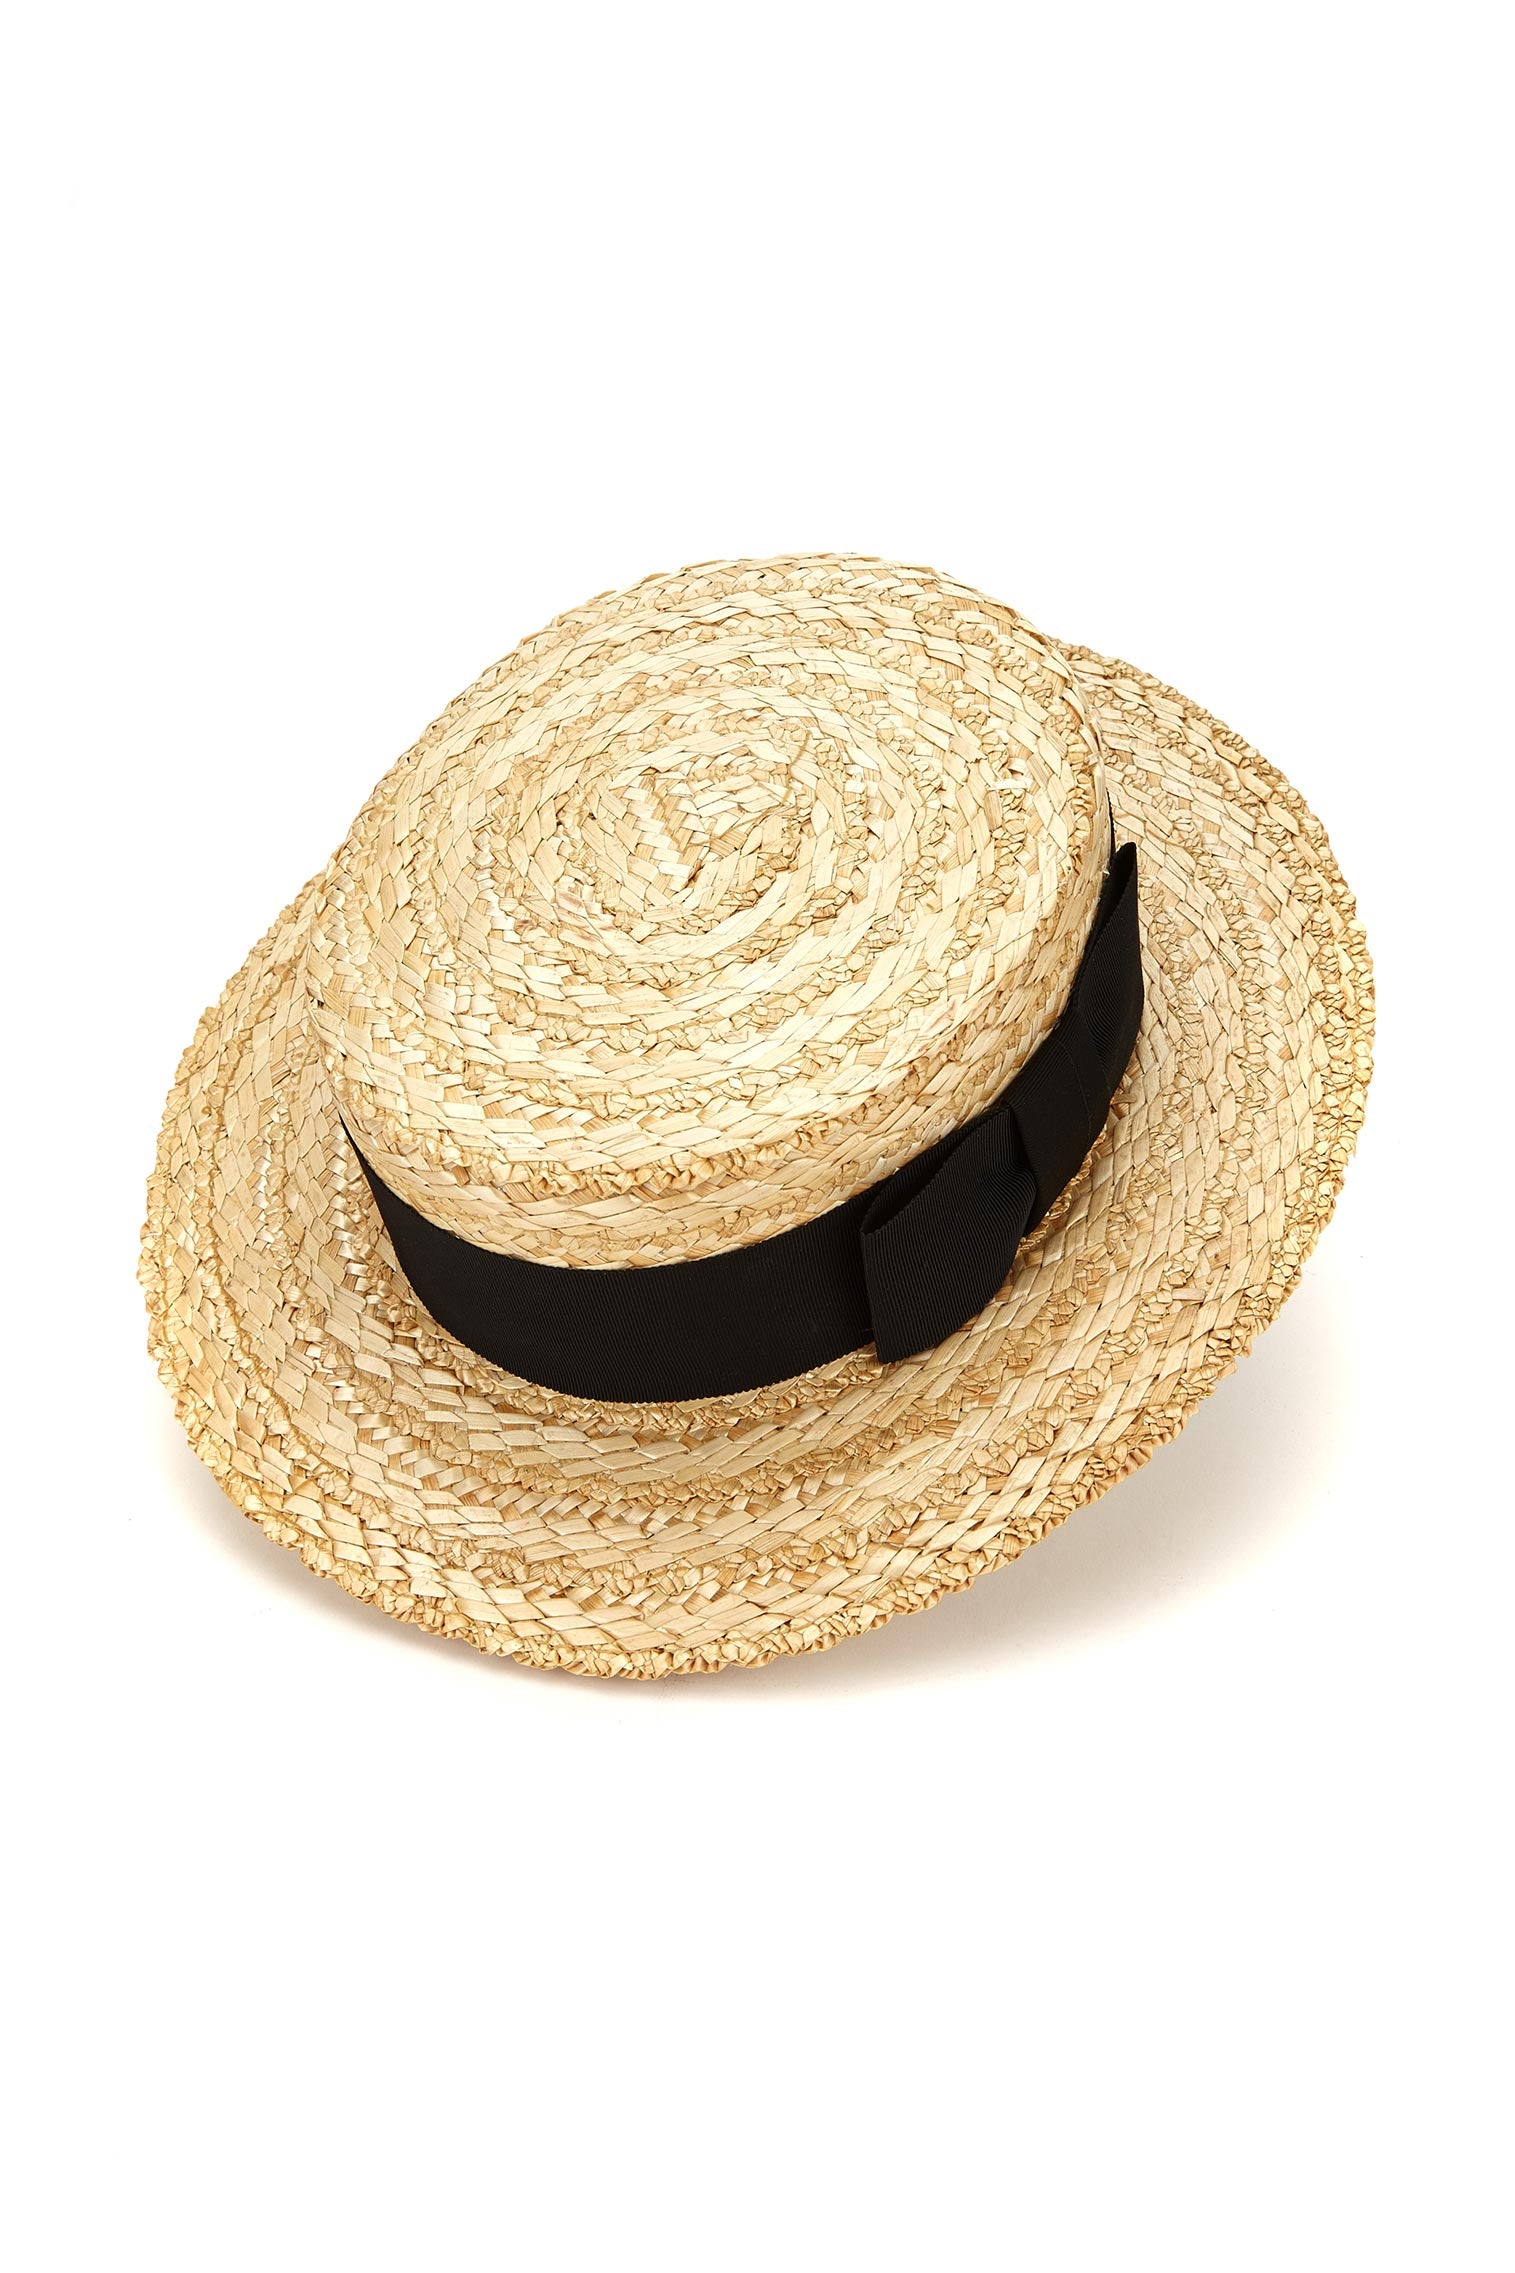 Classic Boater - Panamas and Sun Hats for Men - Lock & Co. Hatters London UK